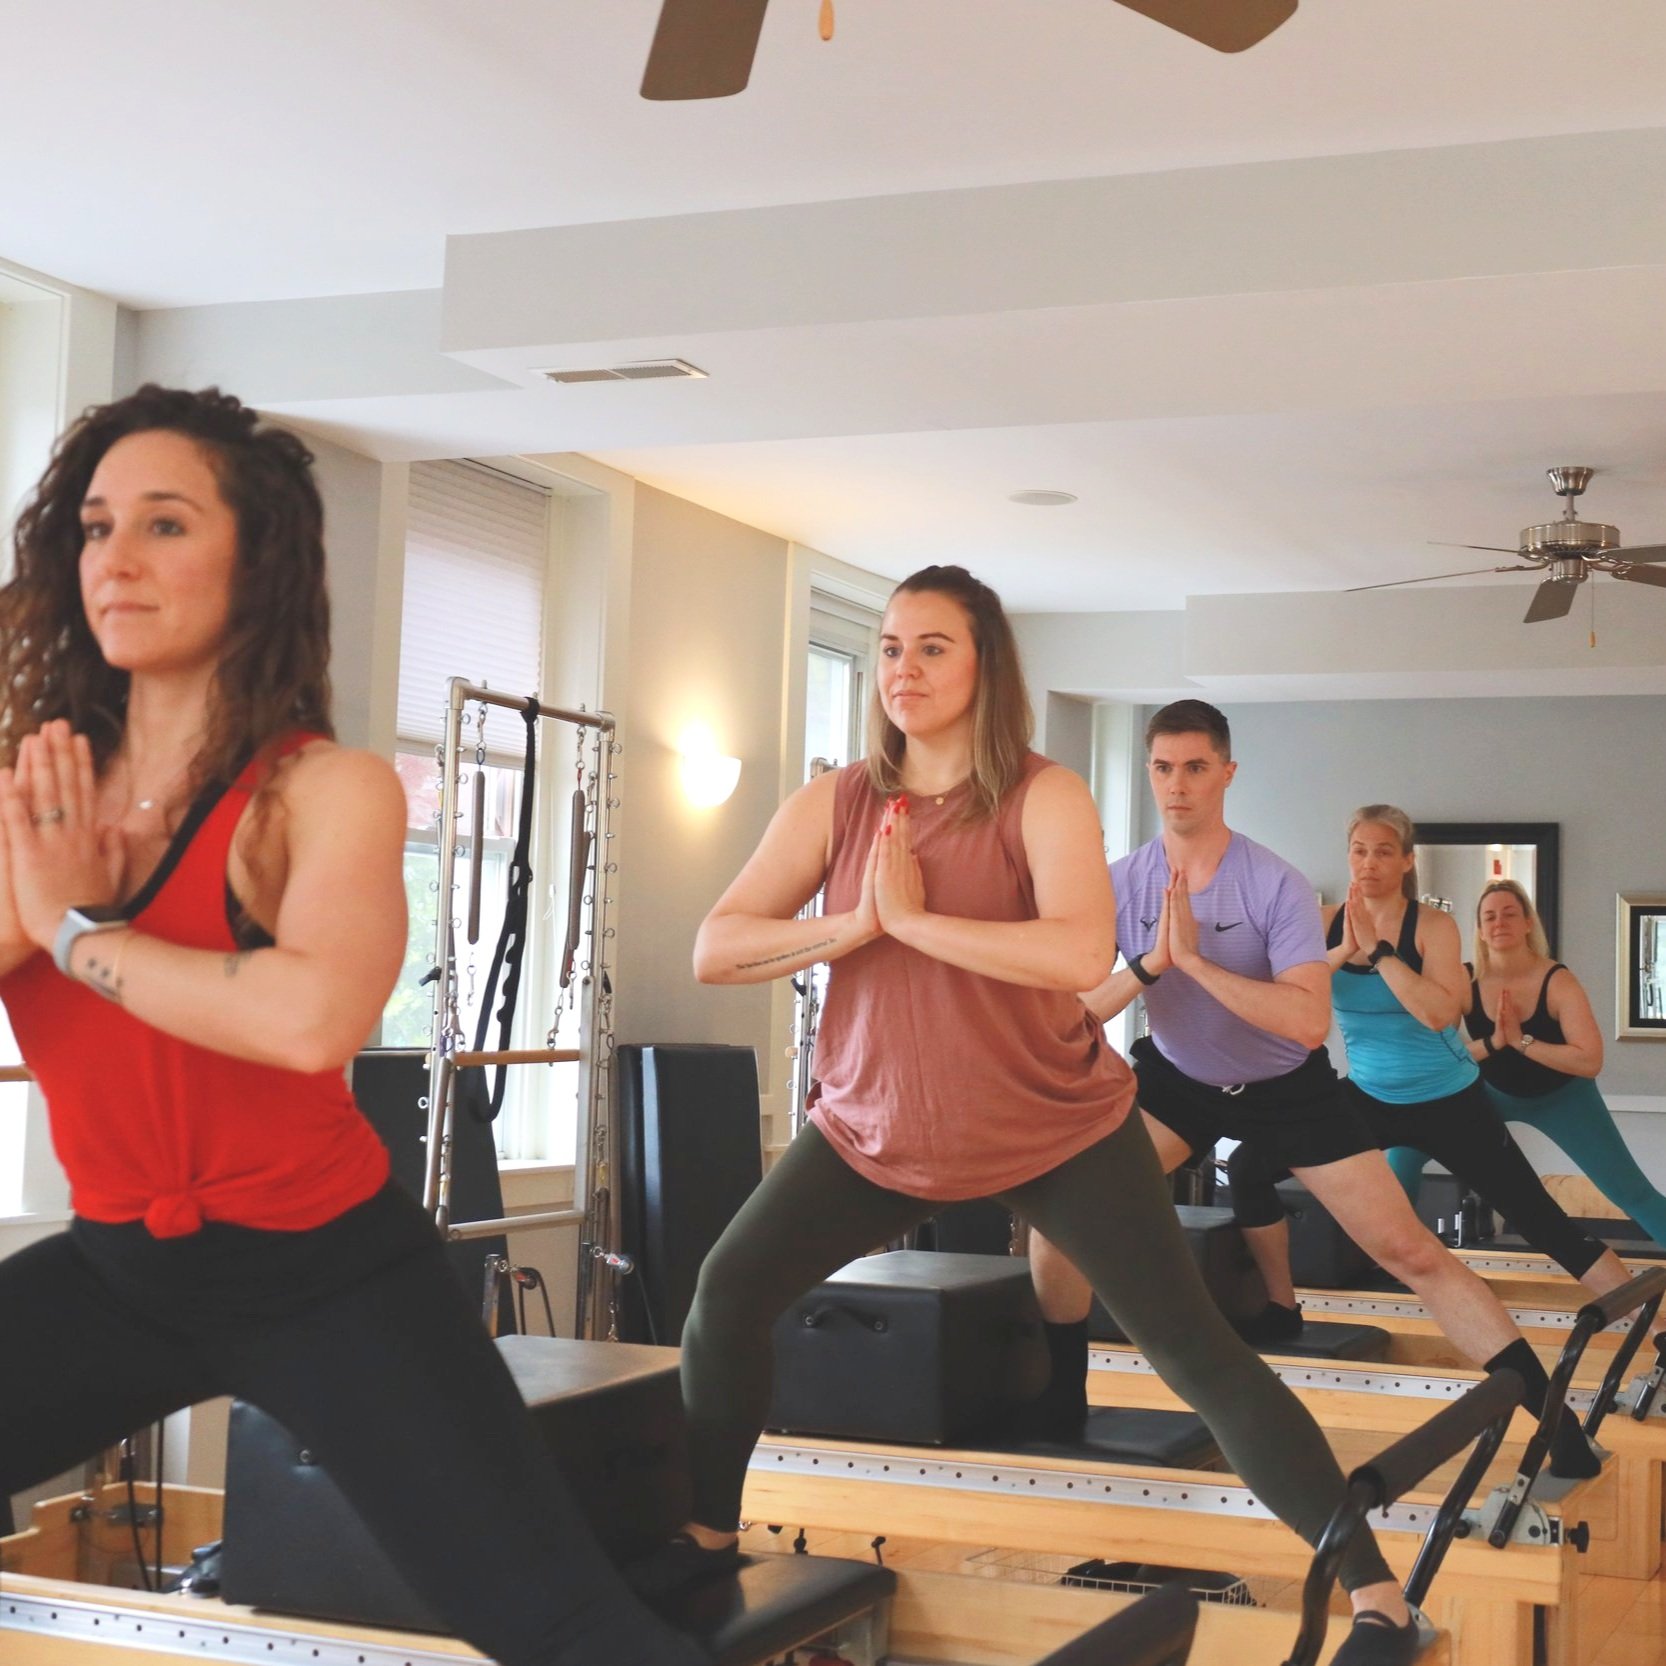 Reformer Class at Fuse Pilates